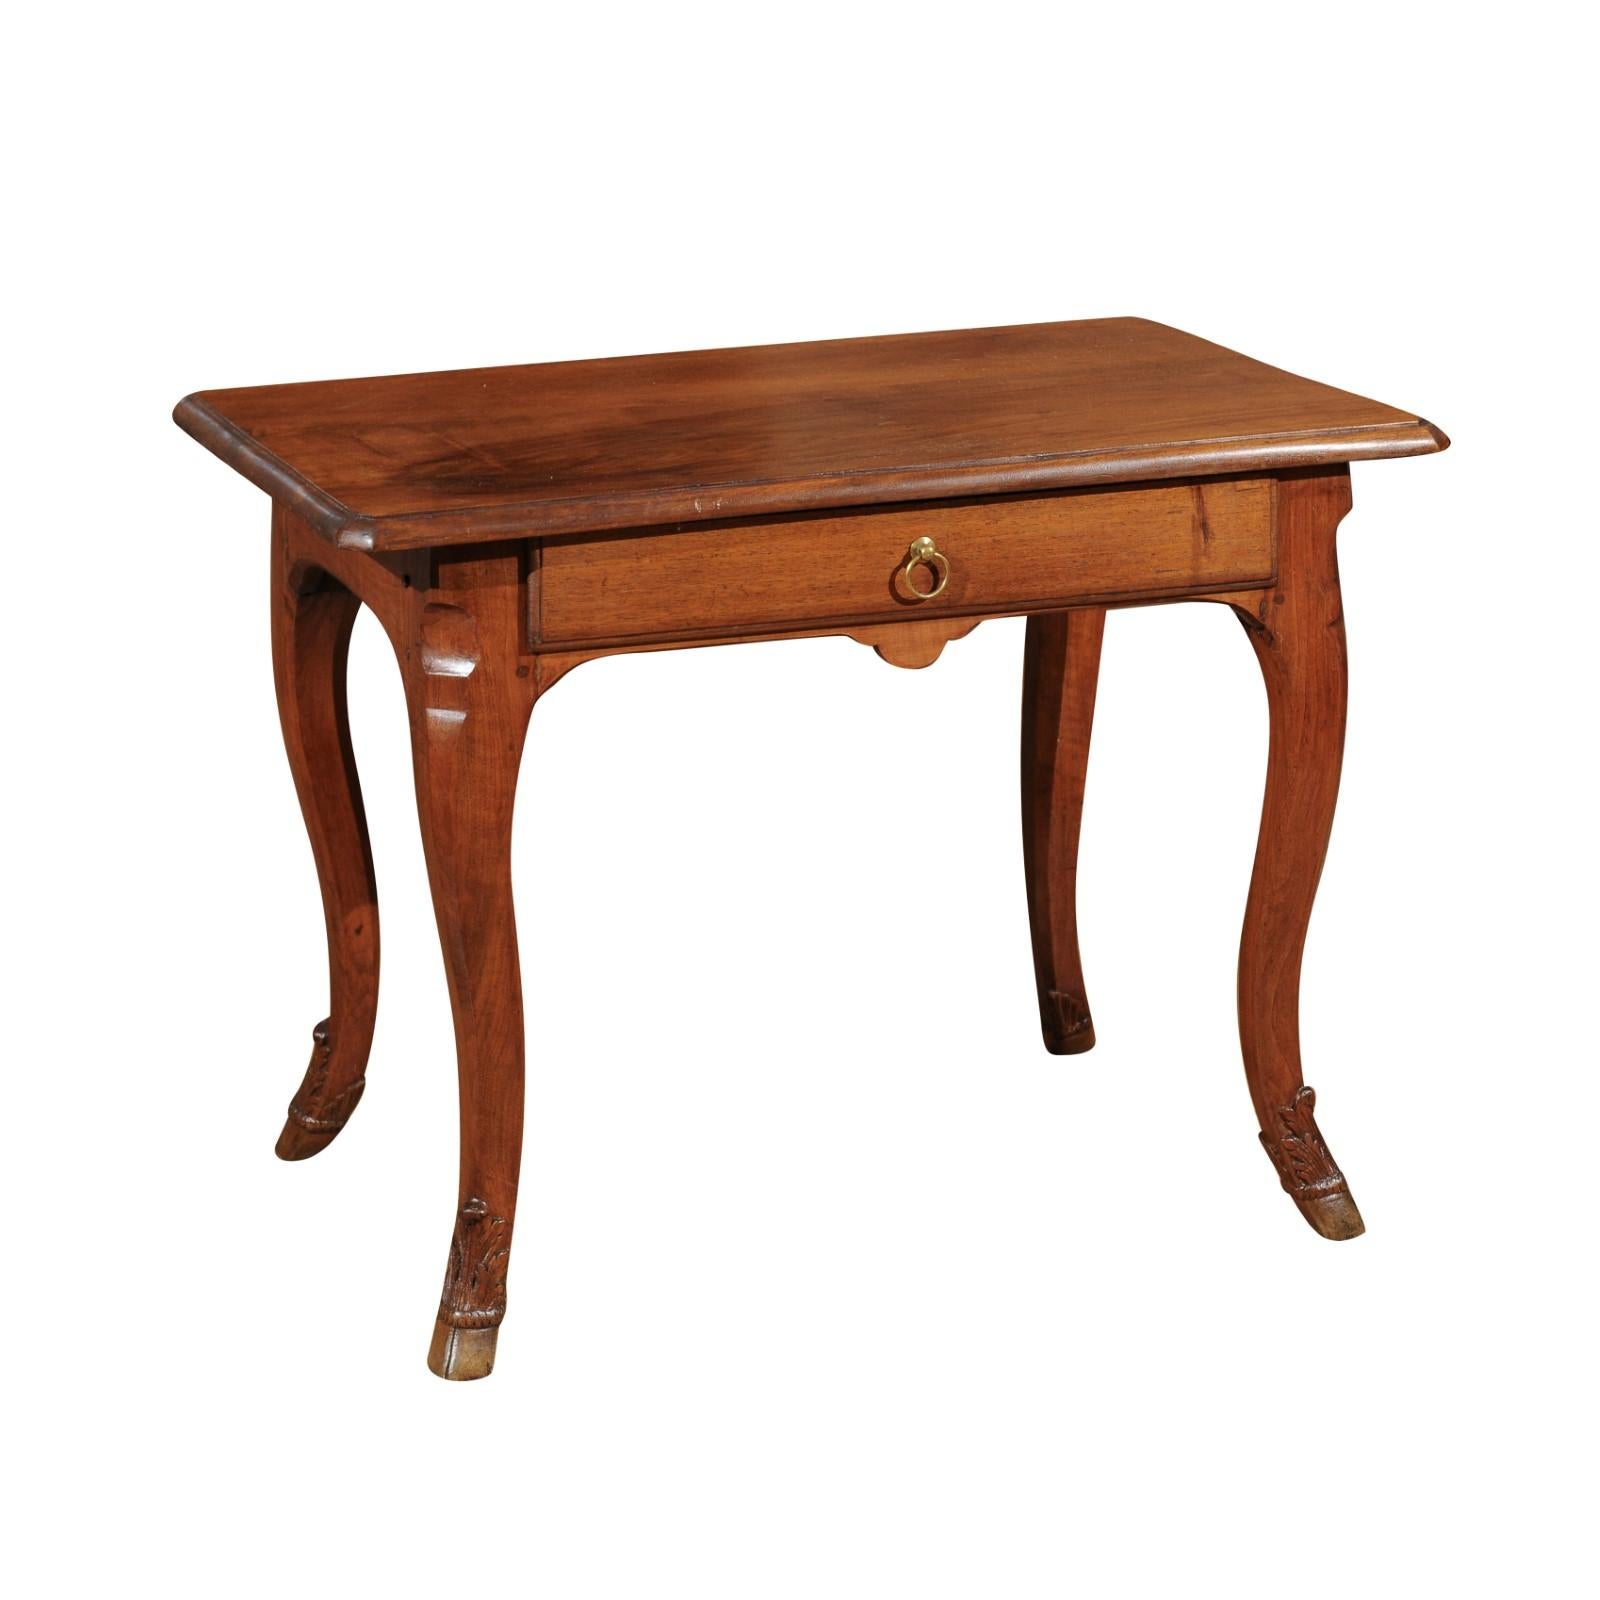 French 1860s Louis XV Style Walnut Side Table with Hoofed Feet and Single Drawer For Sale